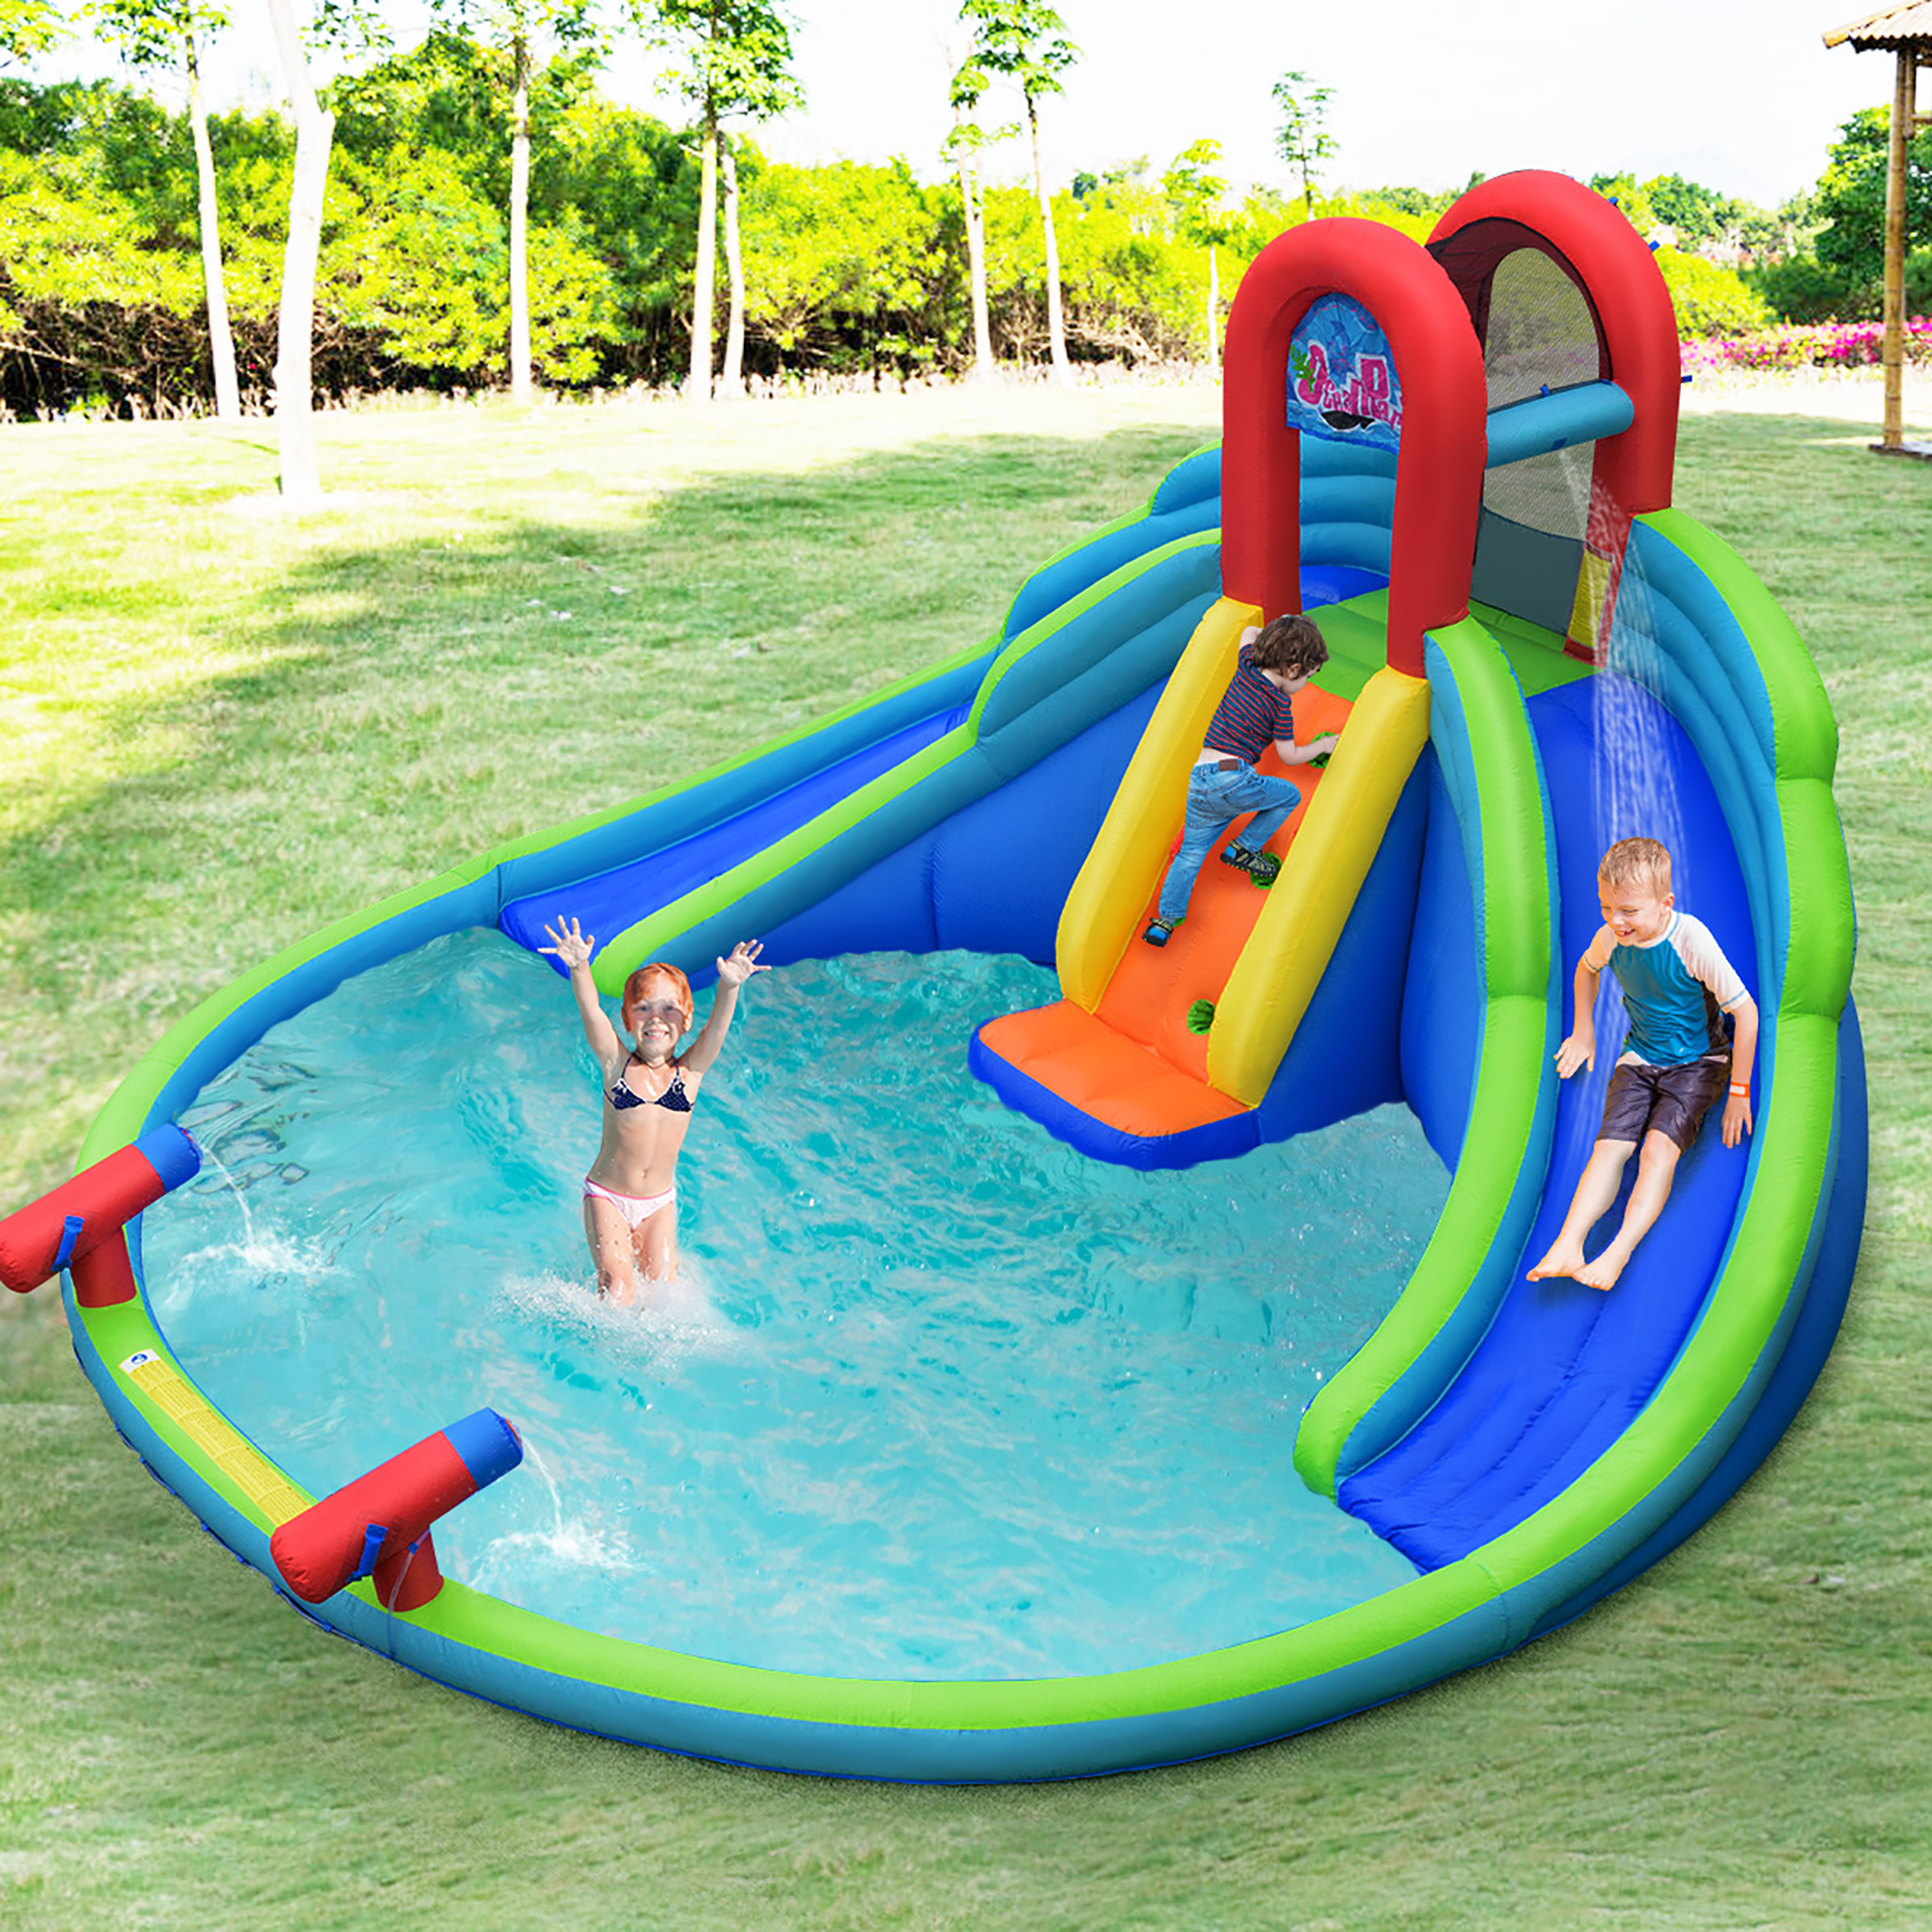 Costway Inflatable Bounce House Kids Water Splash Pool Dual Slides Climbing Wall without Blower - image 3 of 10